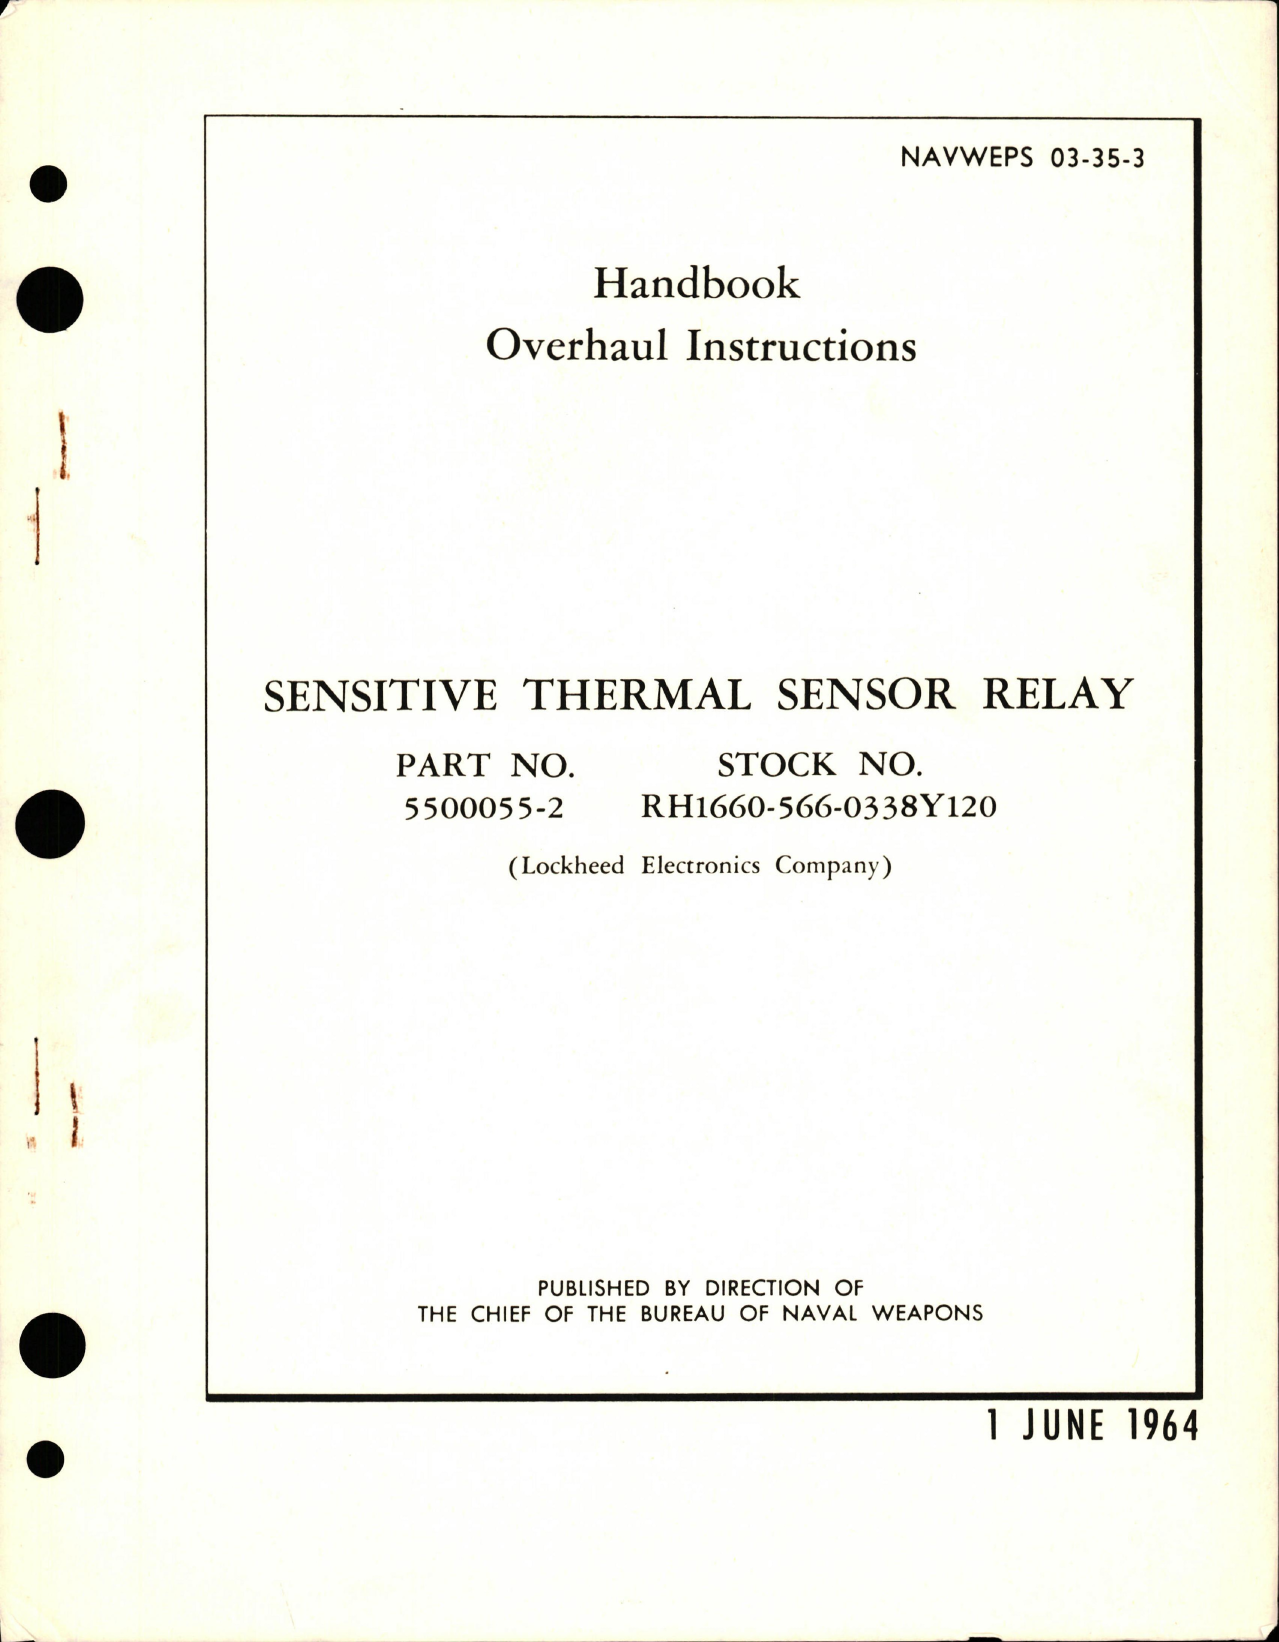 Sample page 1 from AirCorps Library document: Overhaul Instructions for Sensitive Thermal Sensor Relay - Part 5500055-2